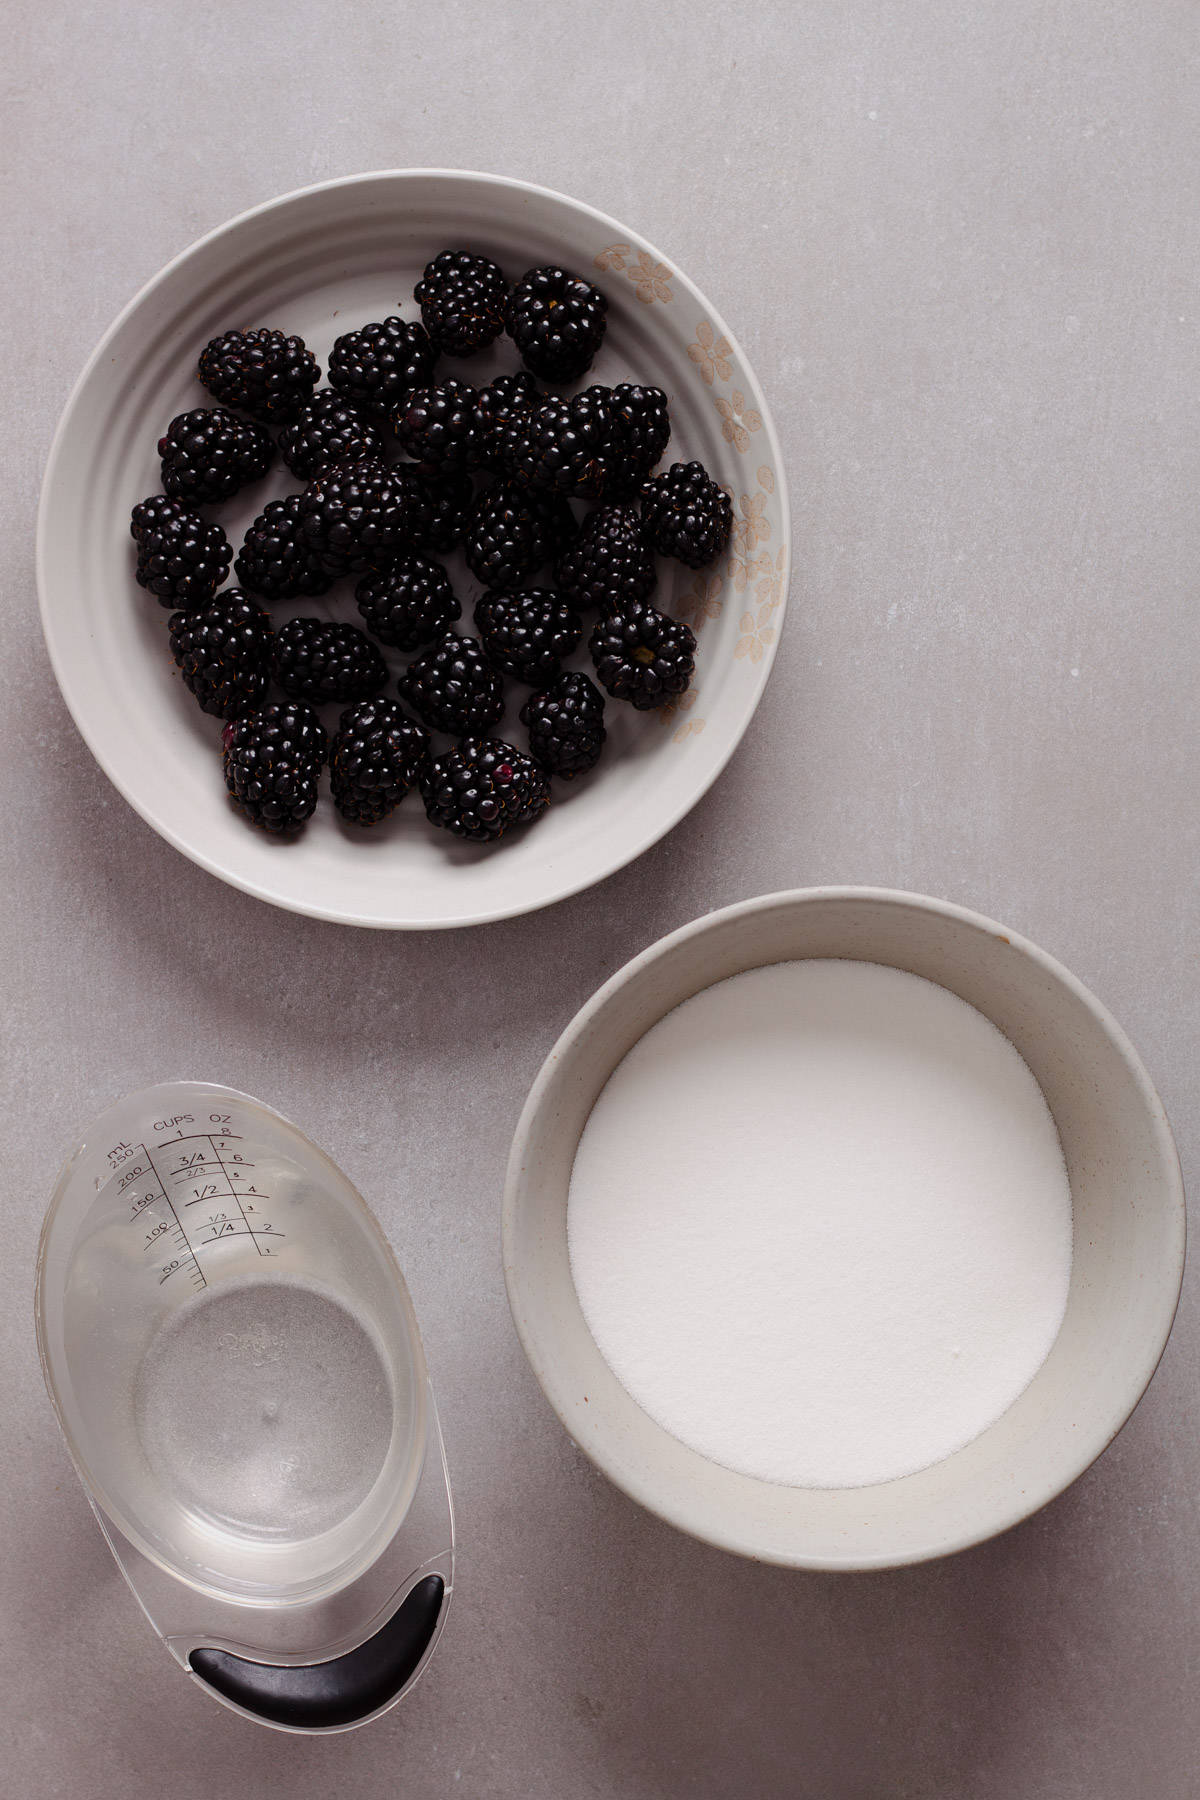 Fresh blackberries, sugar and water on a gray table for a blackberry simple syrup recipe.